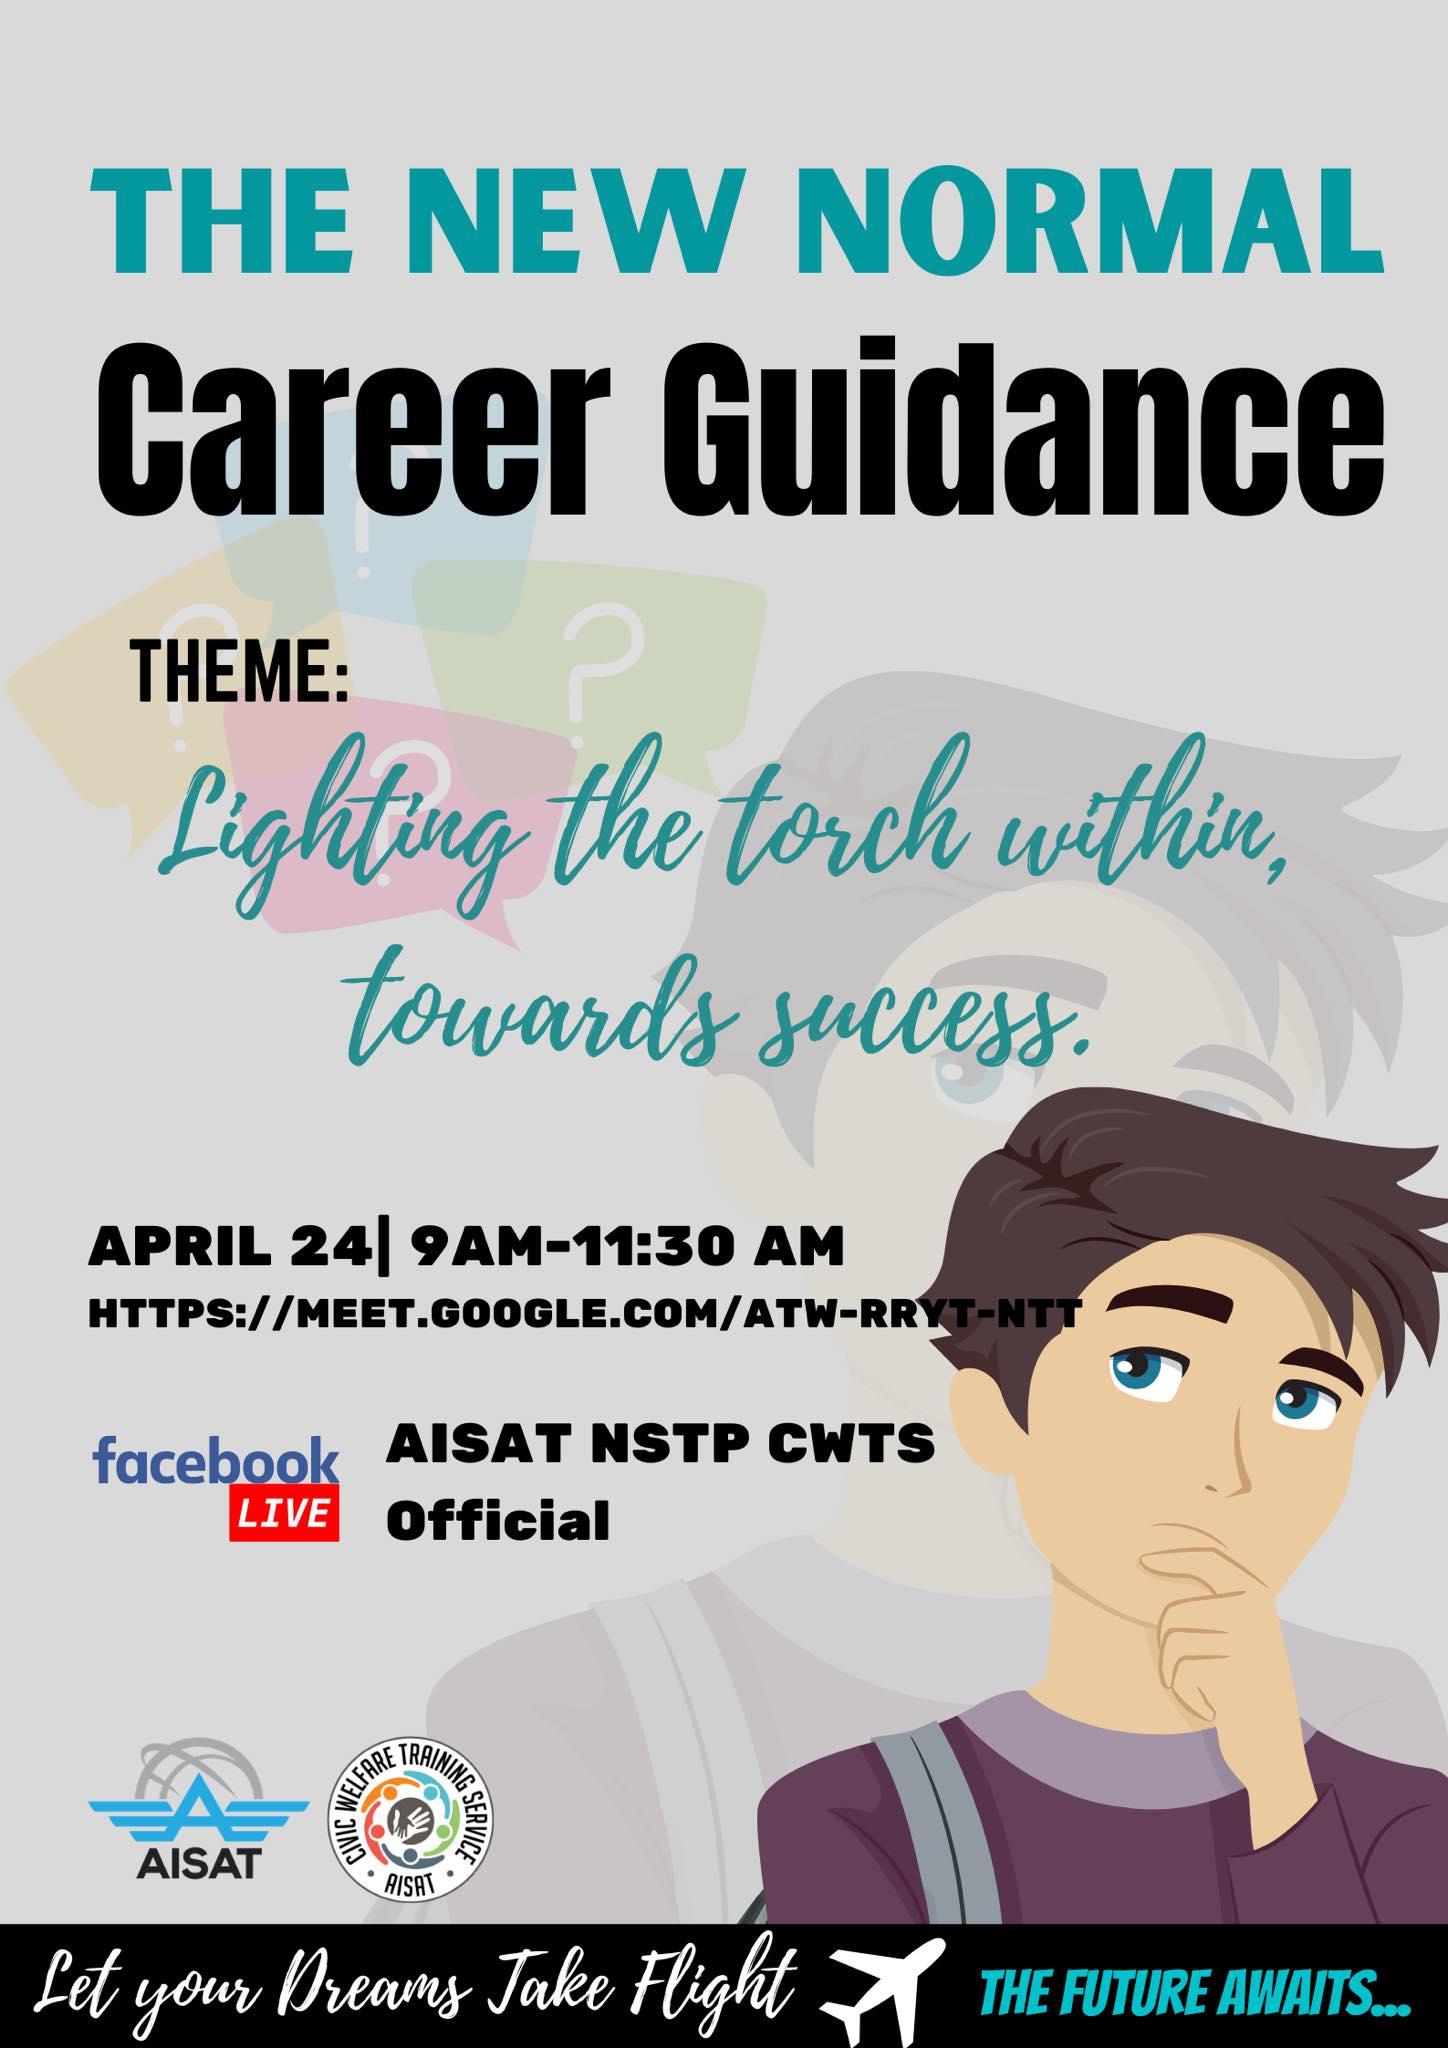 You are currently viewing NSTP Special: “THE NEW NORMAL CAREER GUIDANCE”